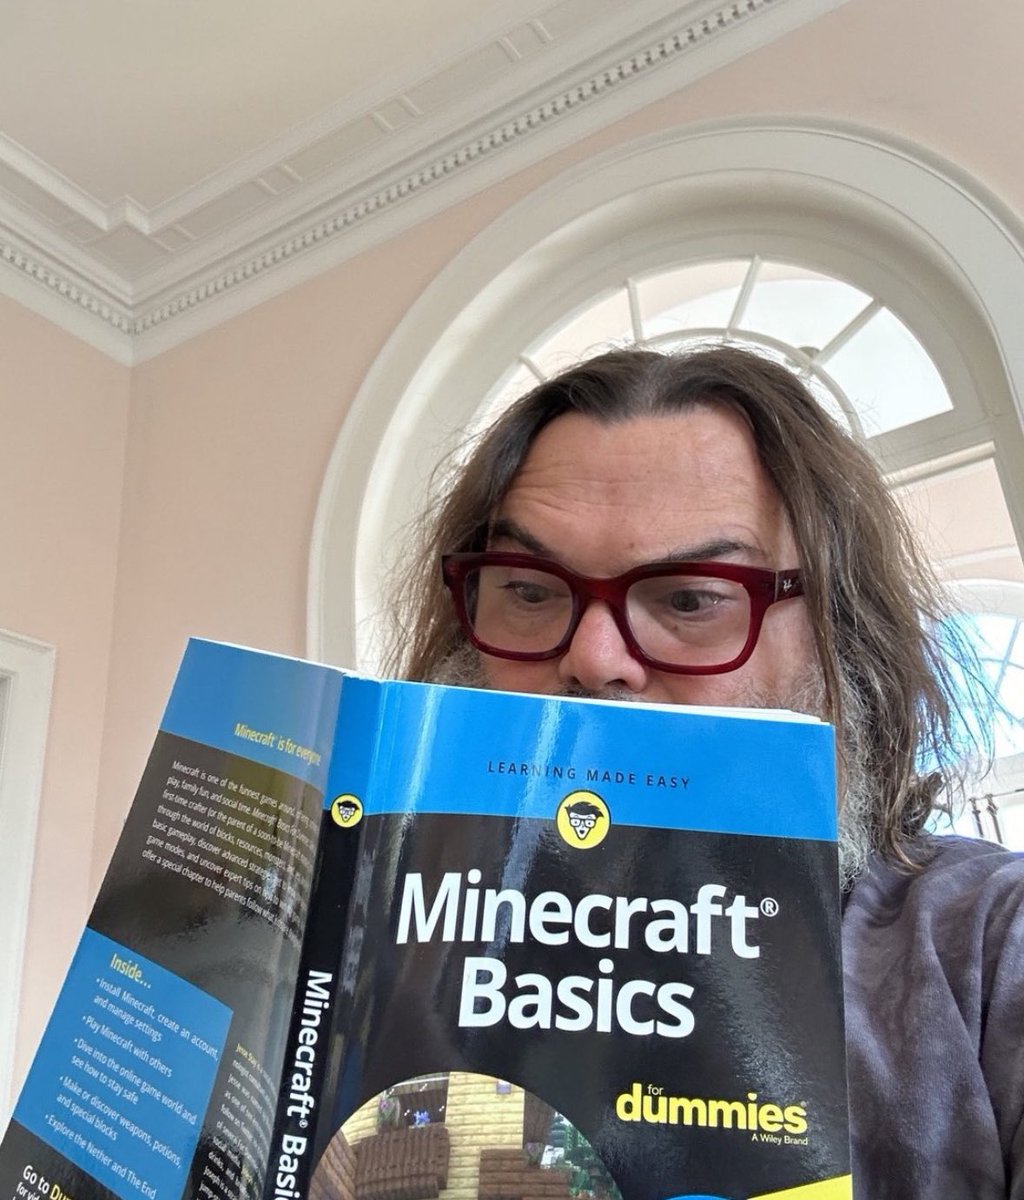 Jack Black confirms he will star in the live-action ‘MINECRAFT’ movie. Filming is about to begin.